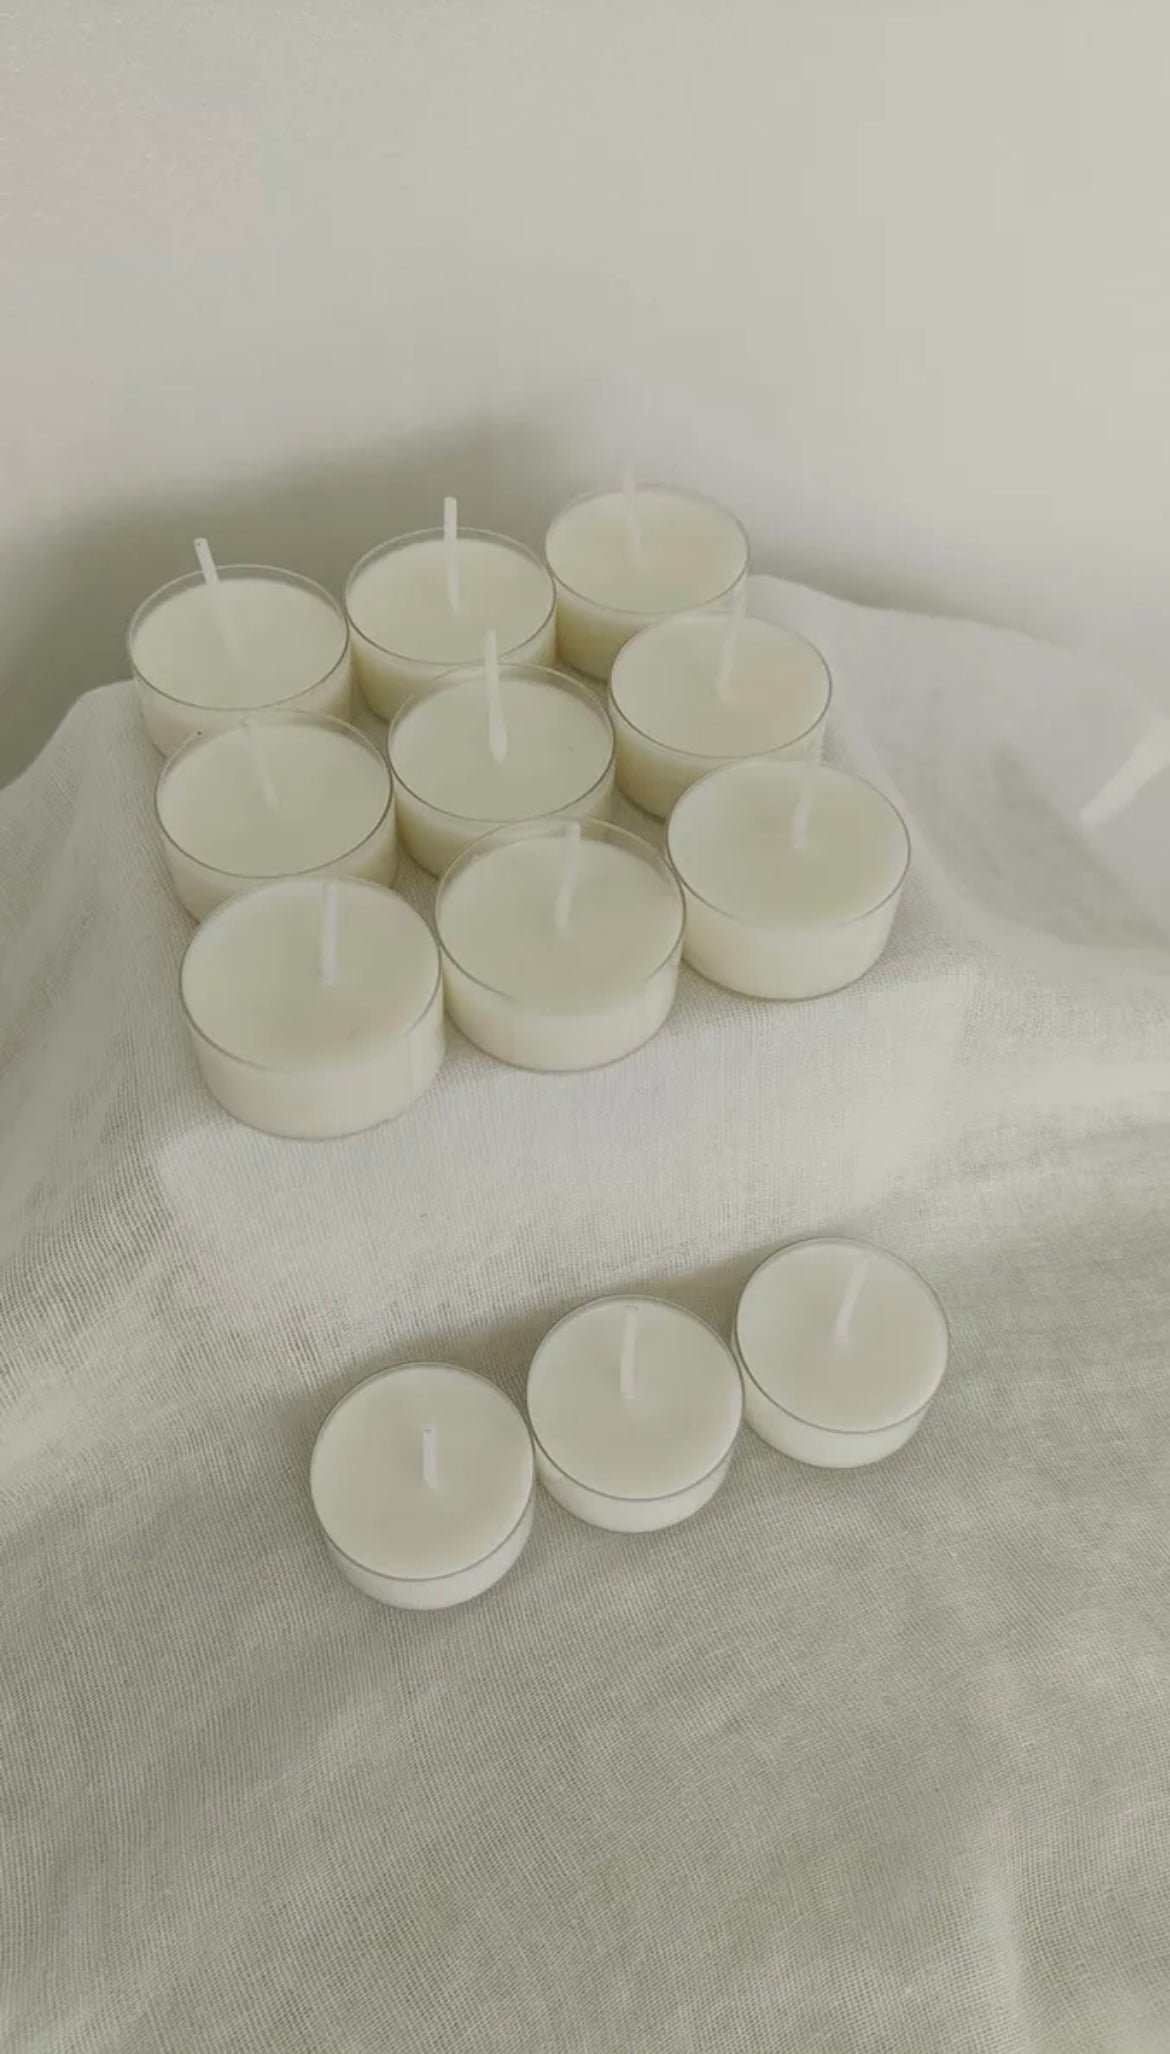 Soy Wax Unscented Tealights 4-5 Hour Burn